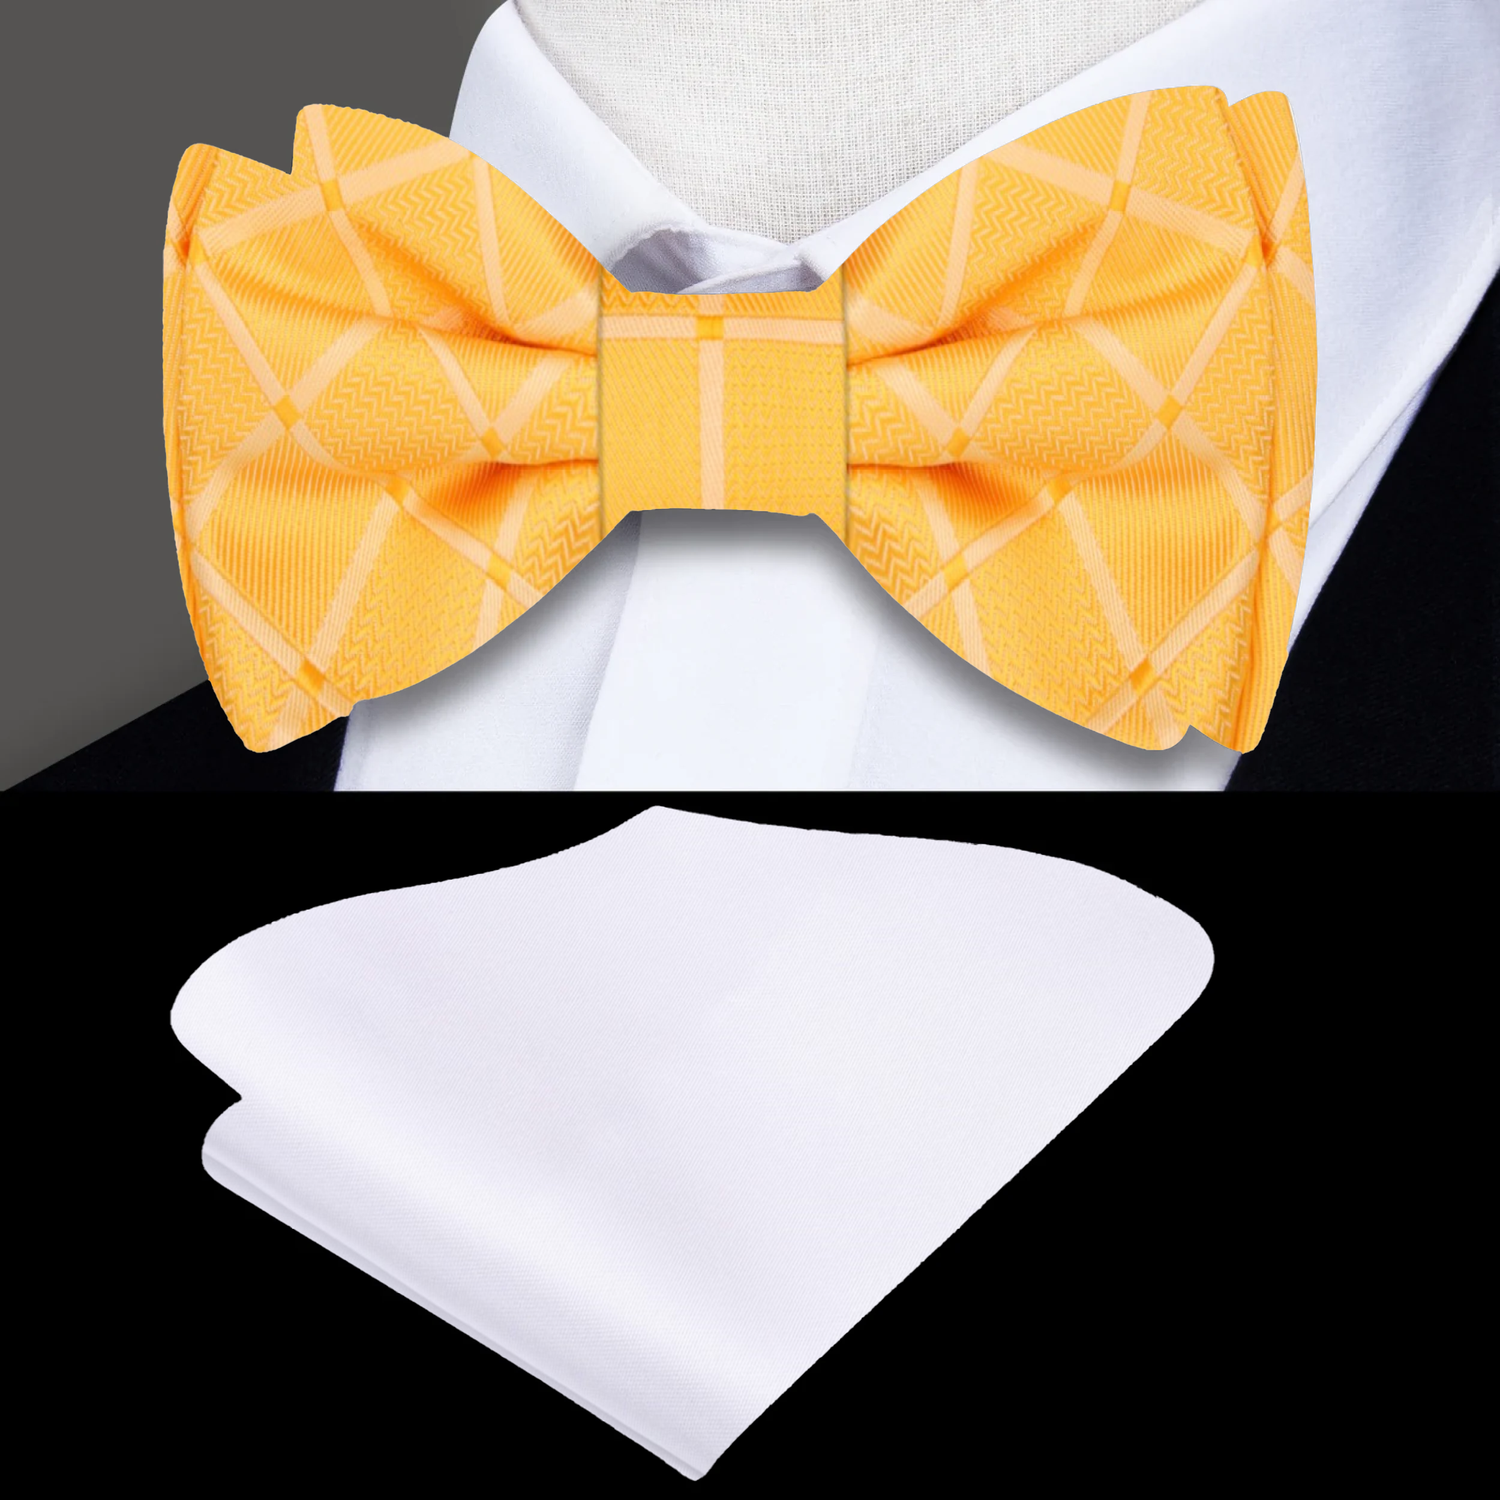 Solid Yellow with Geometric Texture Bow Tie and White Pocket Square